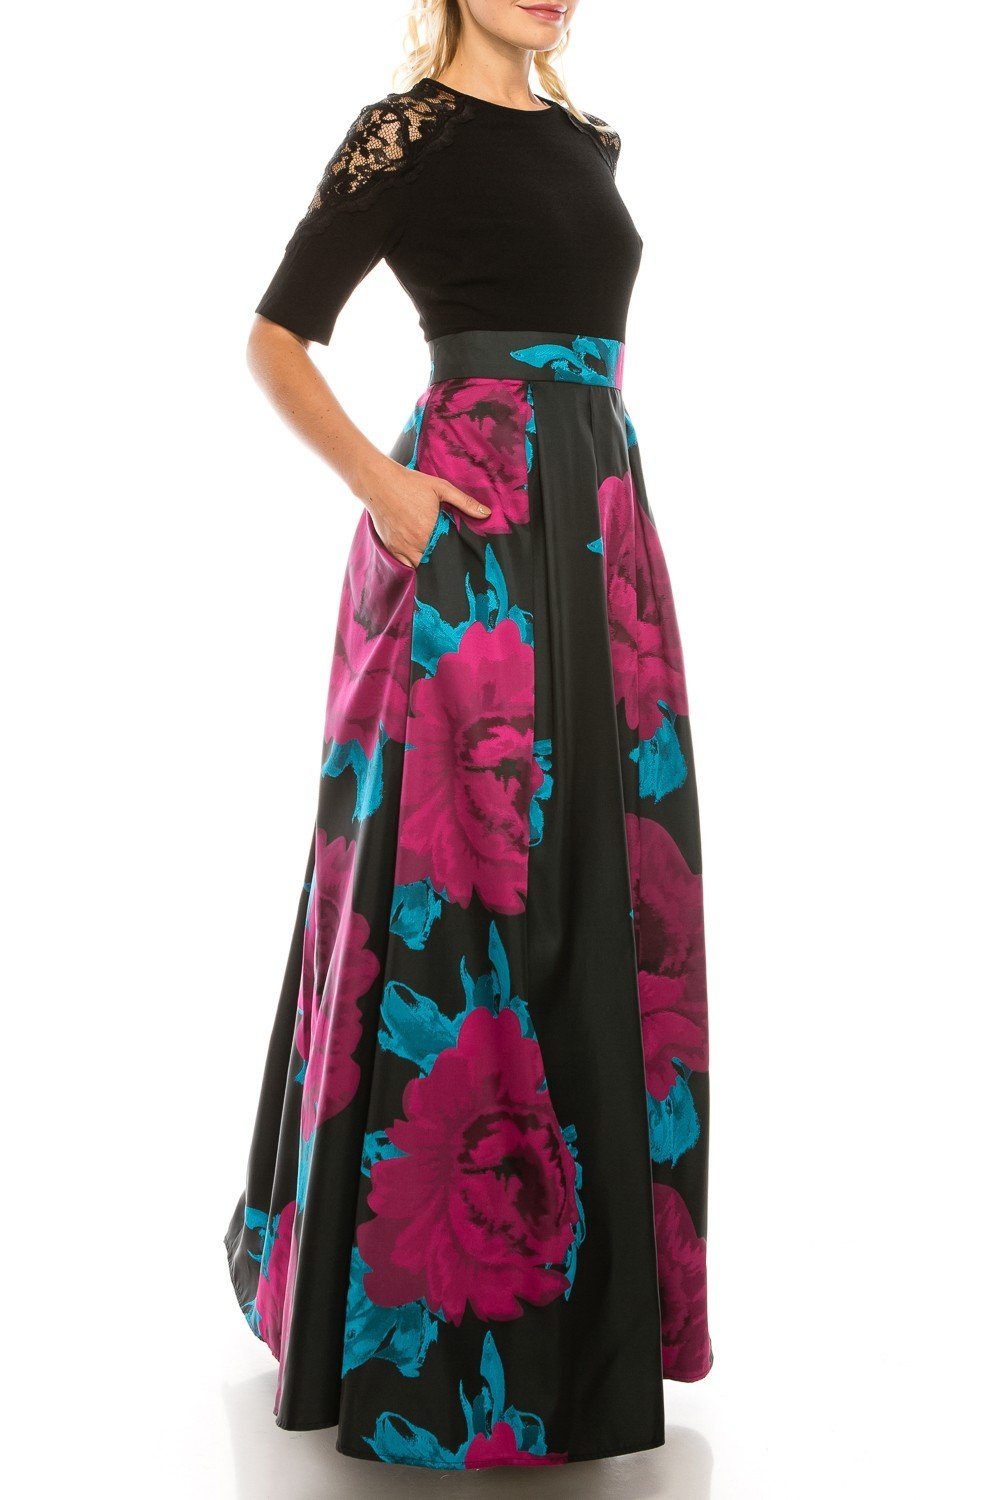 Ignite Evenings - IG3874 Lace Jewel Neck Floral Print A-line Gown In Black and Multi-Color